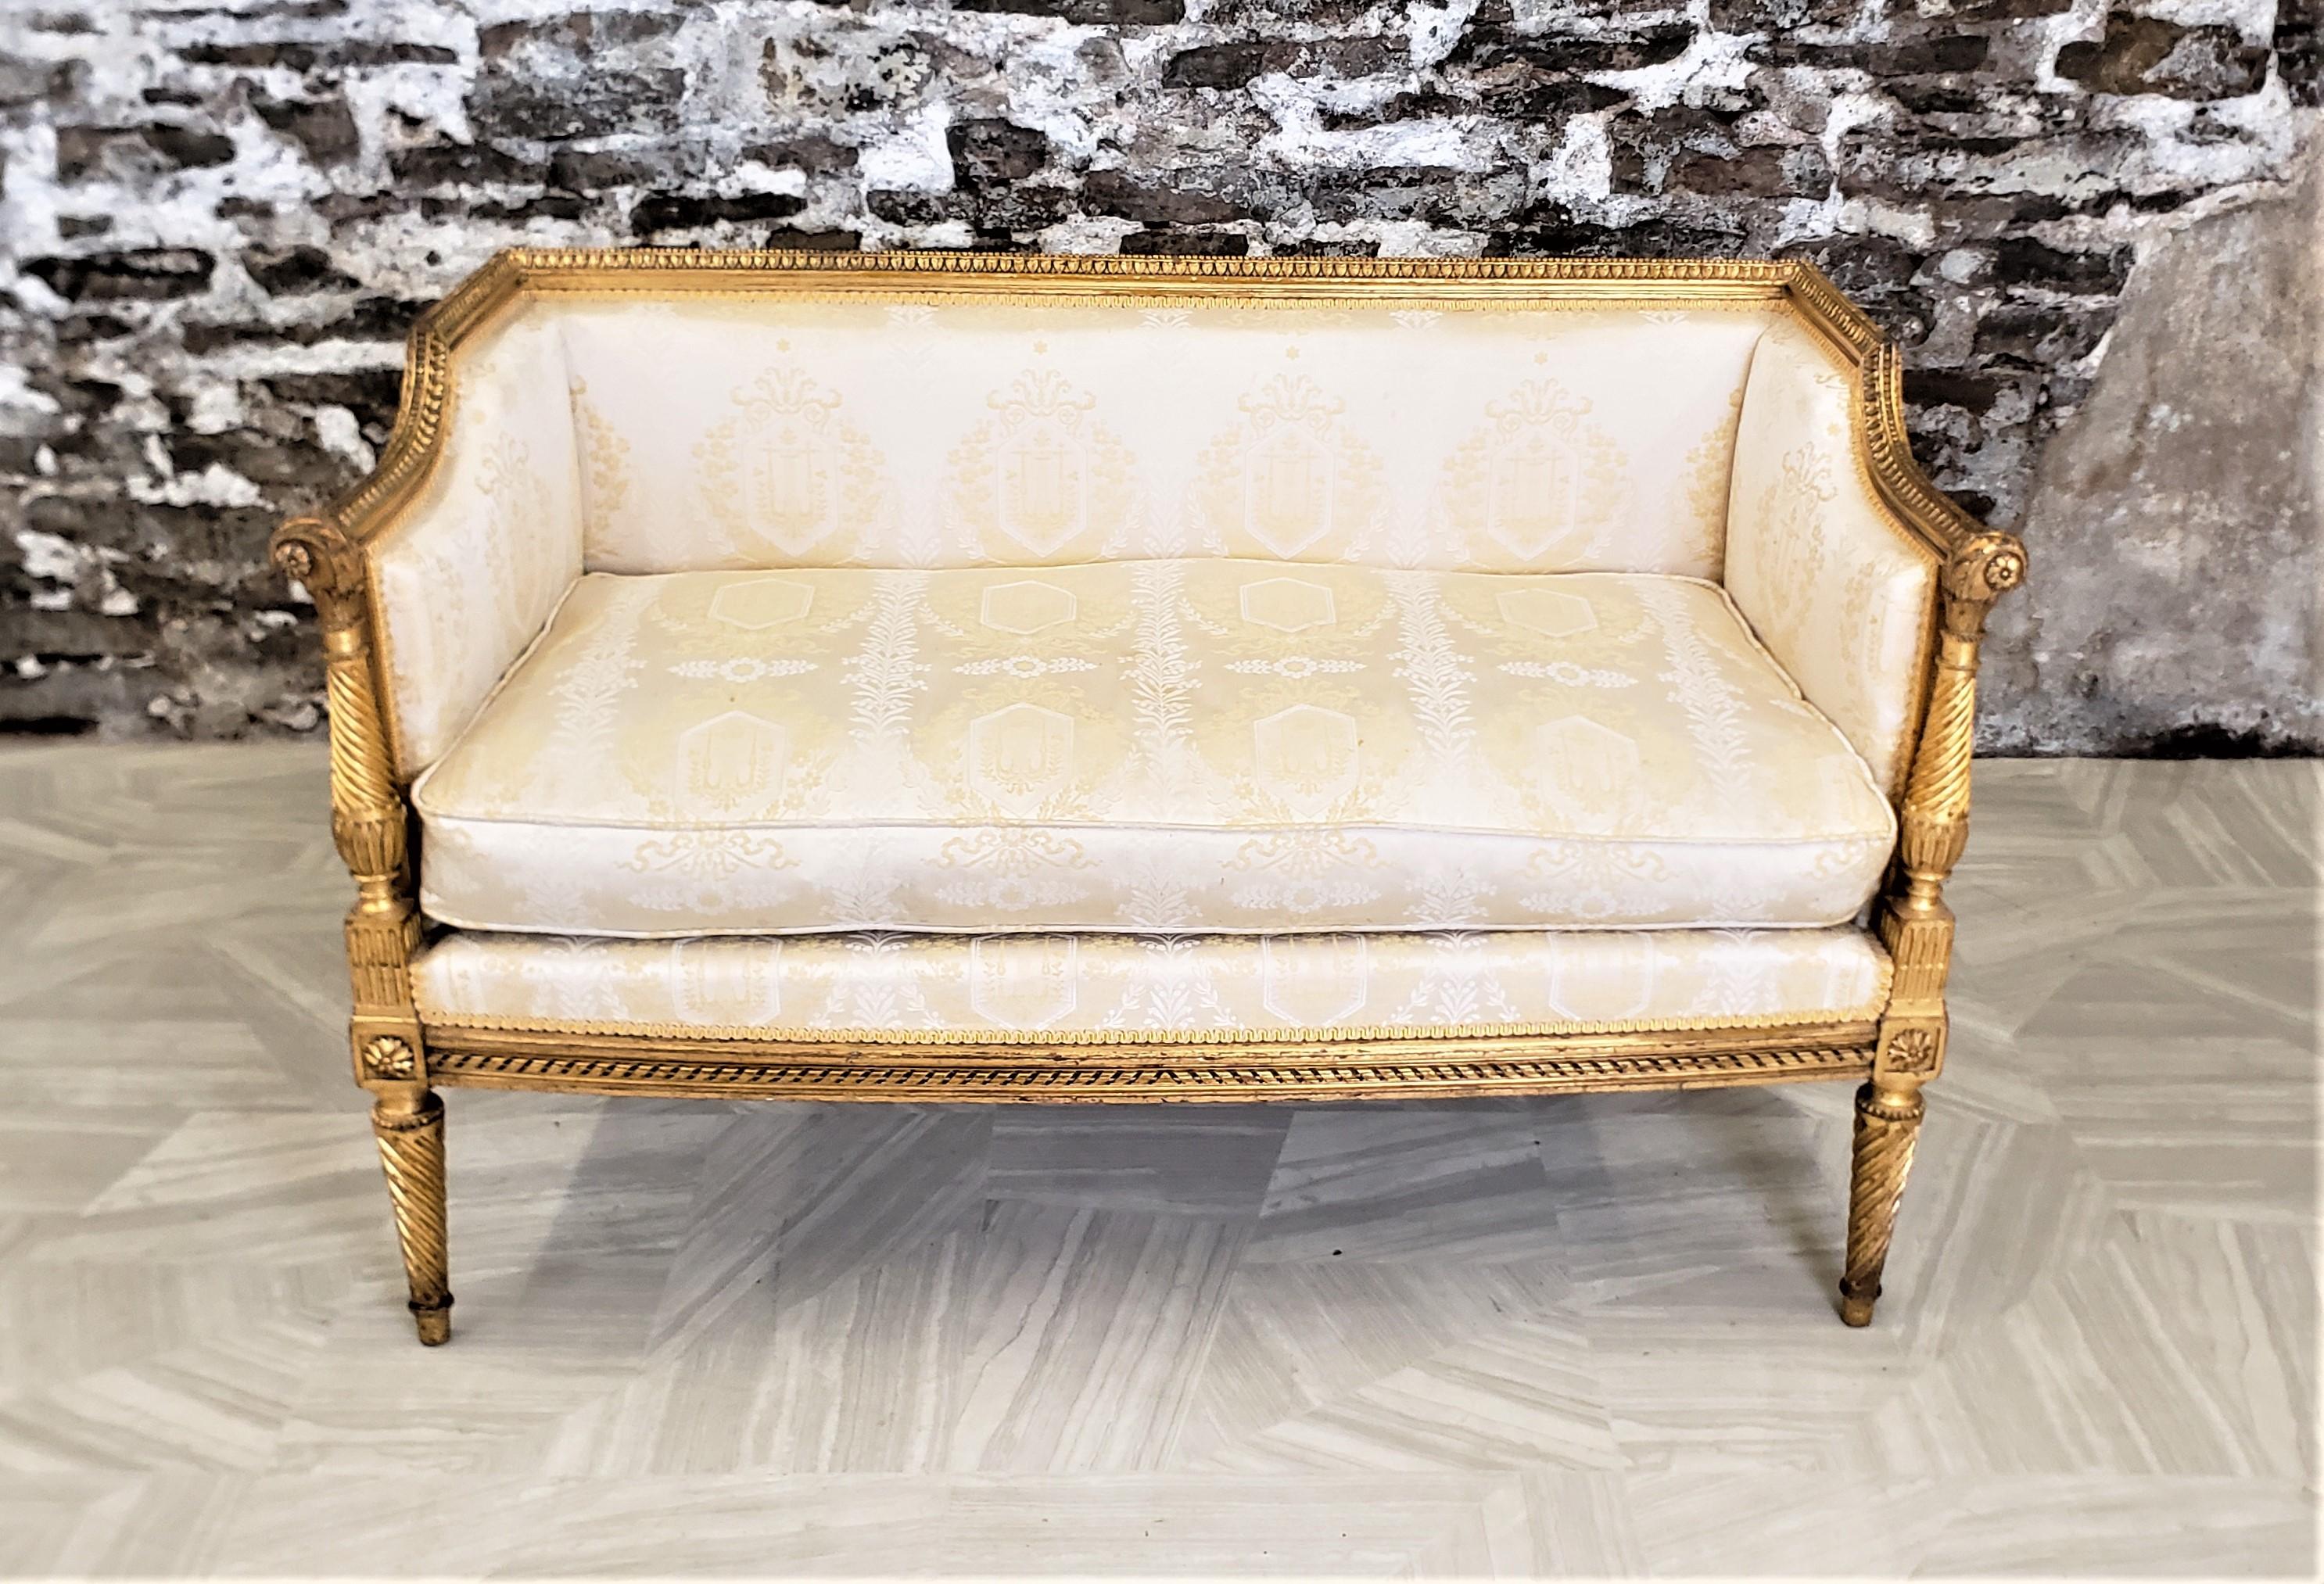 This settee shows no maker's signature, but presumed to have originated from France and dating to approximately 1900 and done in a Directoire style. The printed cream fabric is framed with elaborately hand-carved wood with a gilt finish with